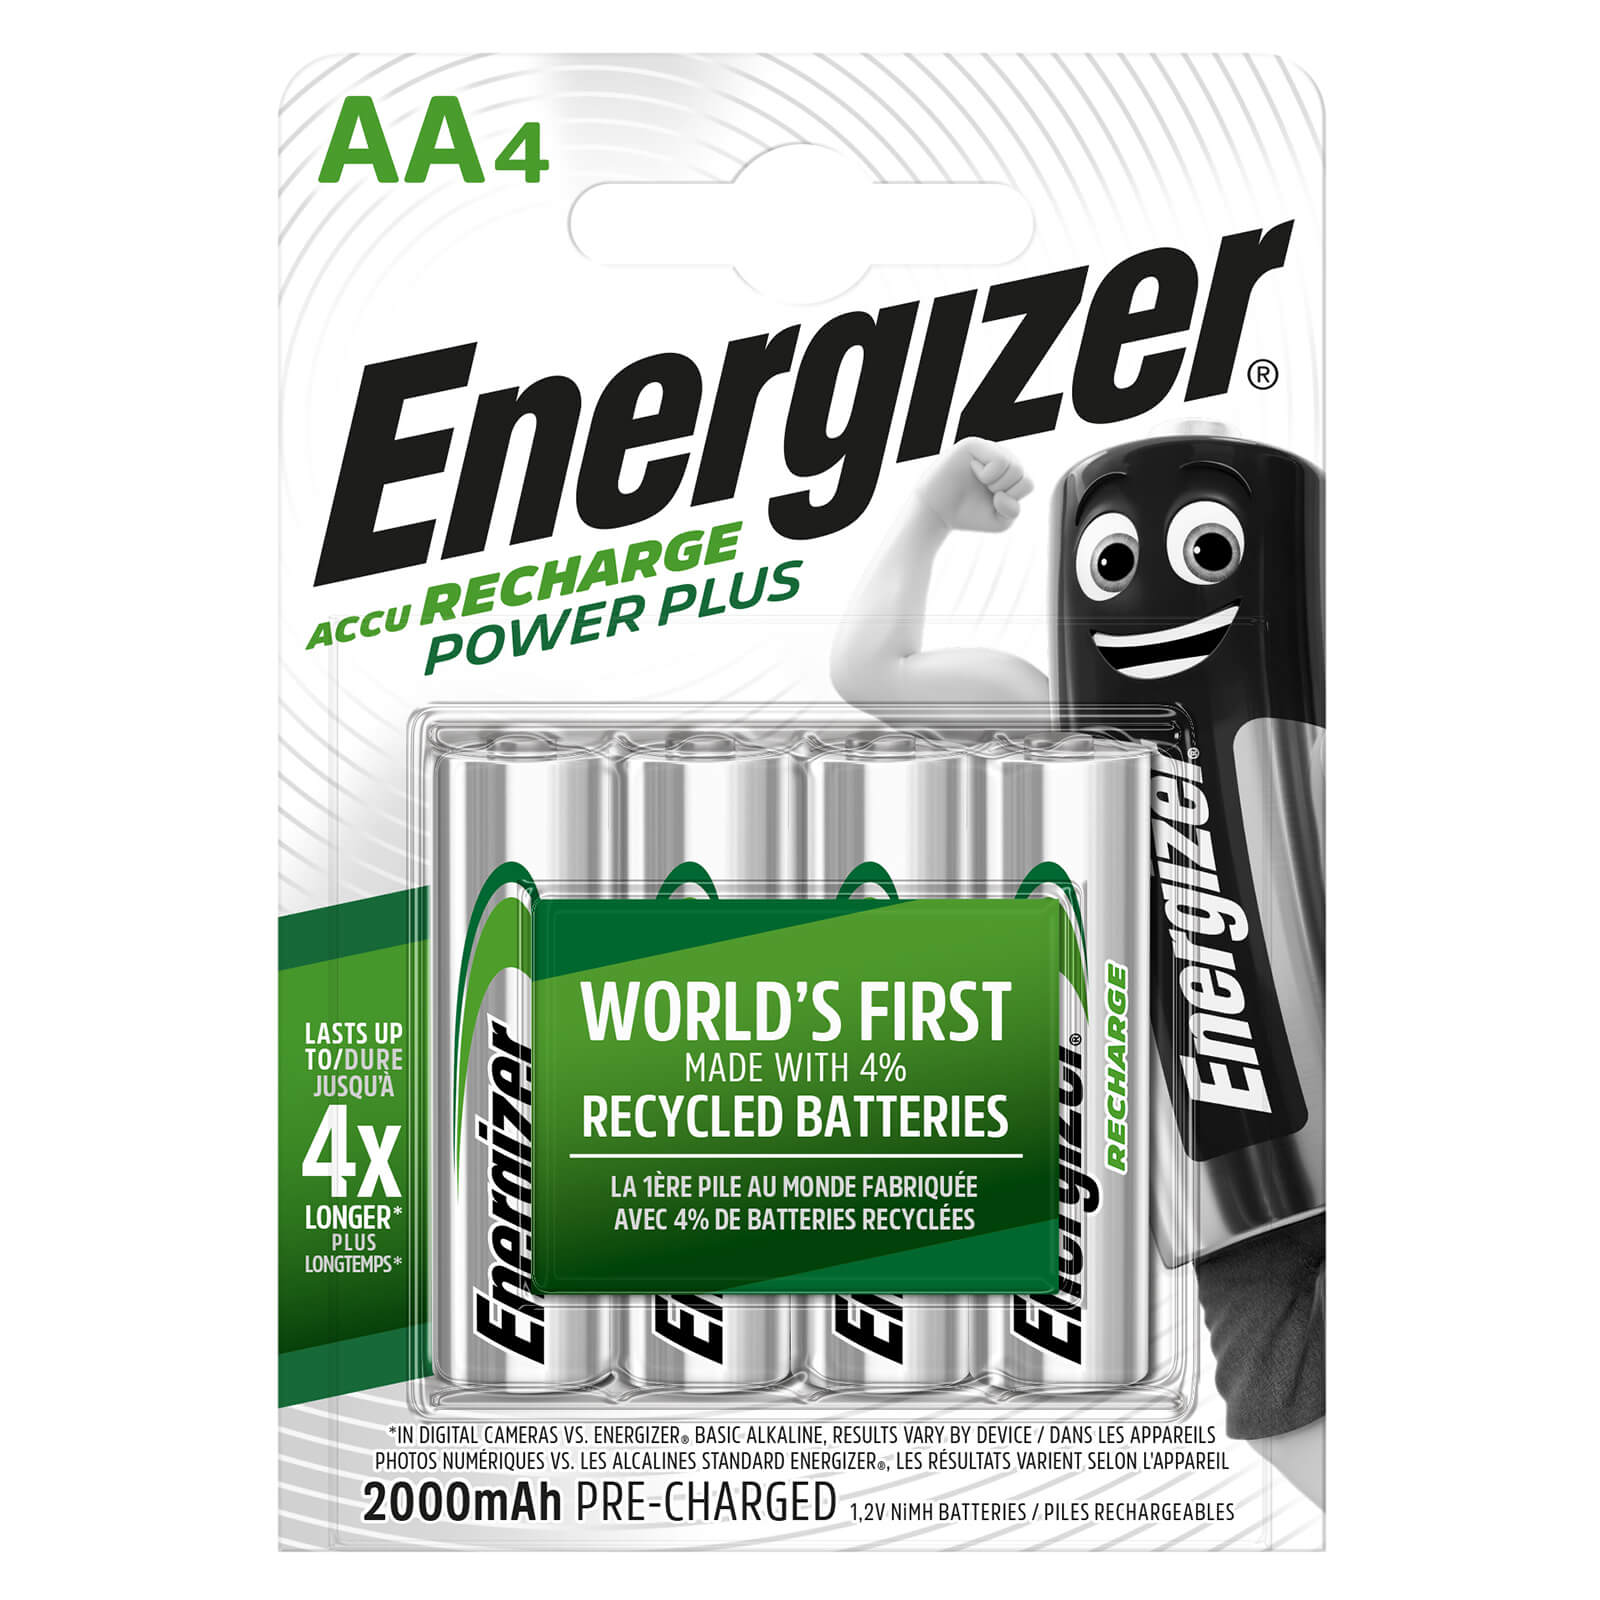 Energizer Power Plus 2000mAh Rechargeable AA Batteries - 4 Pack